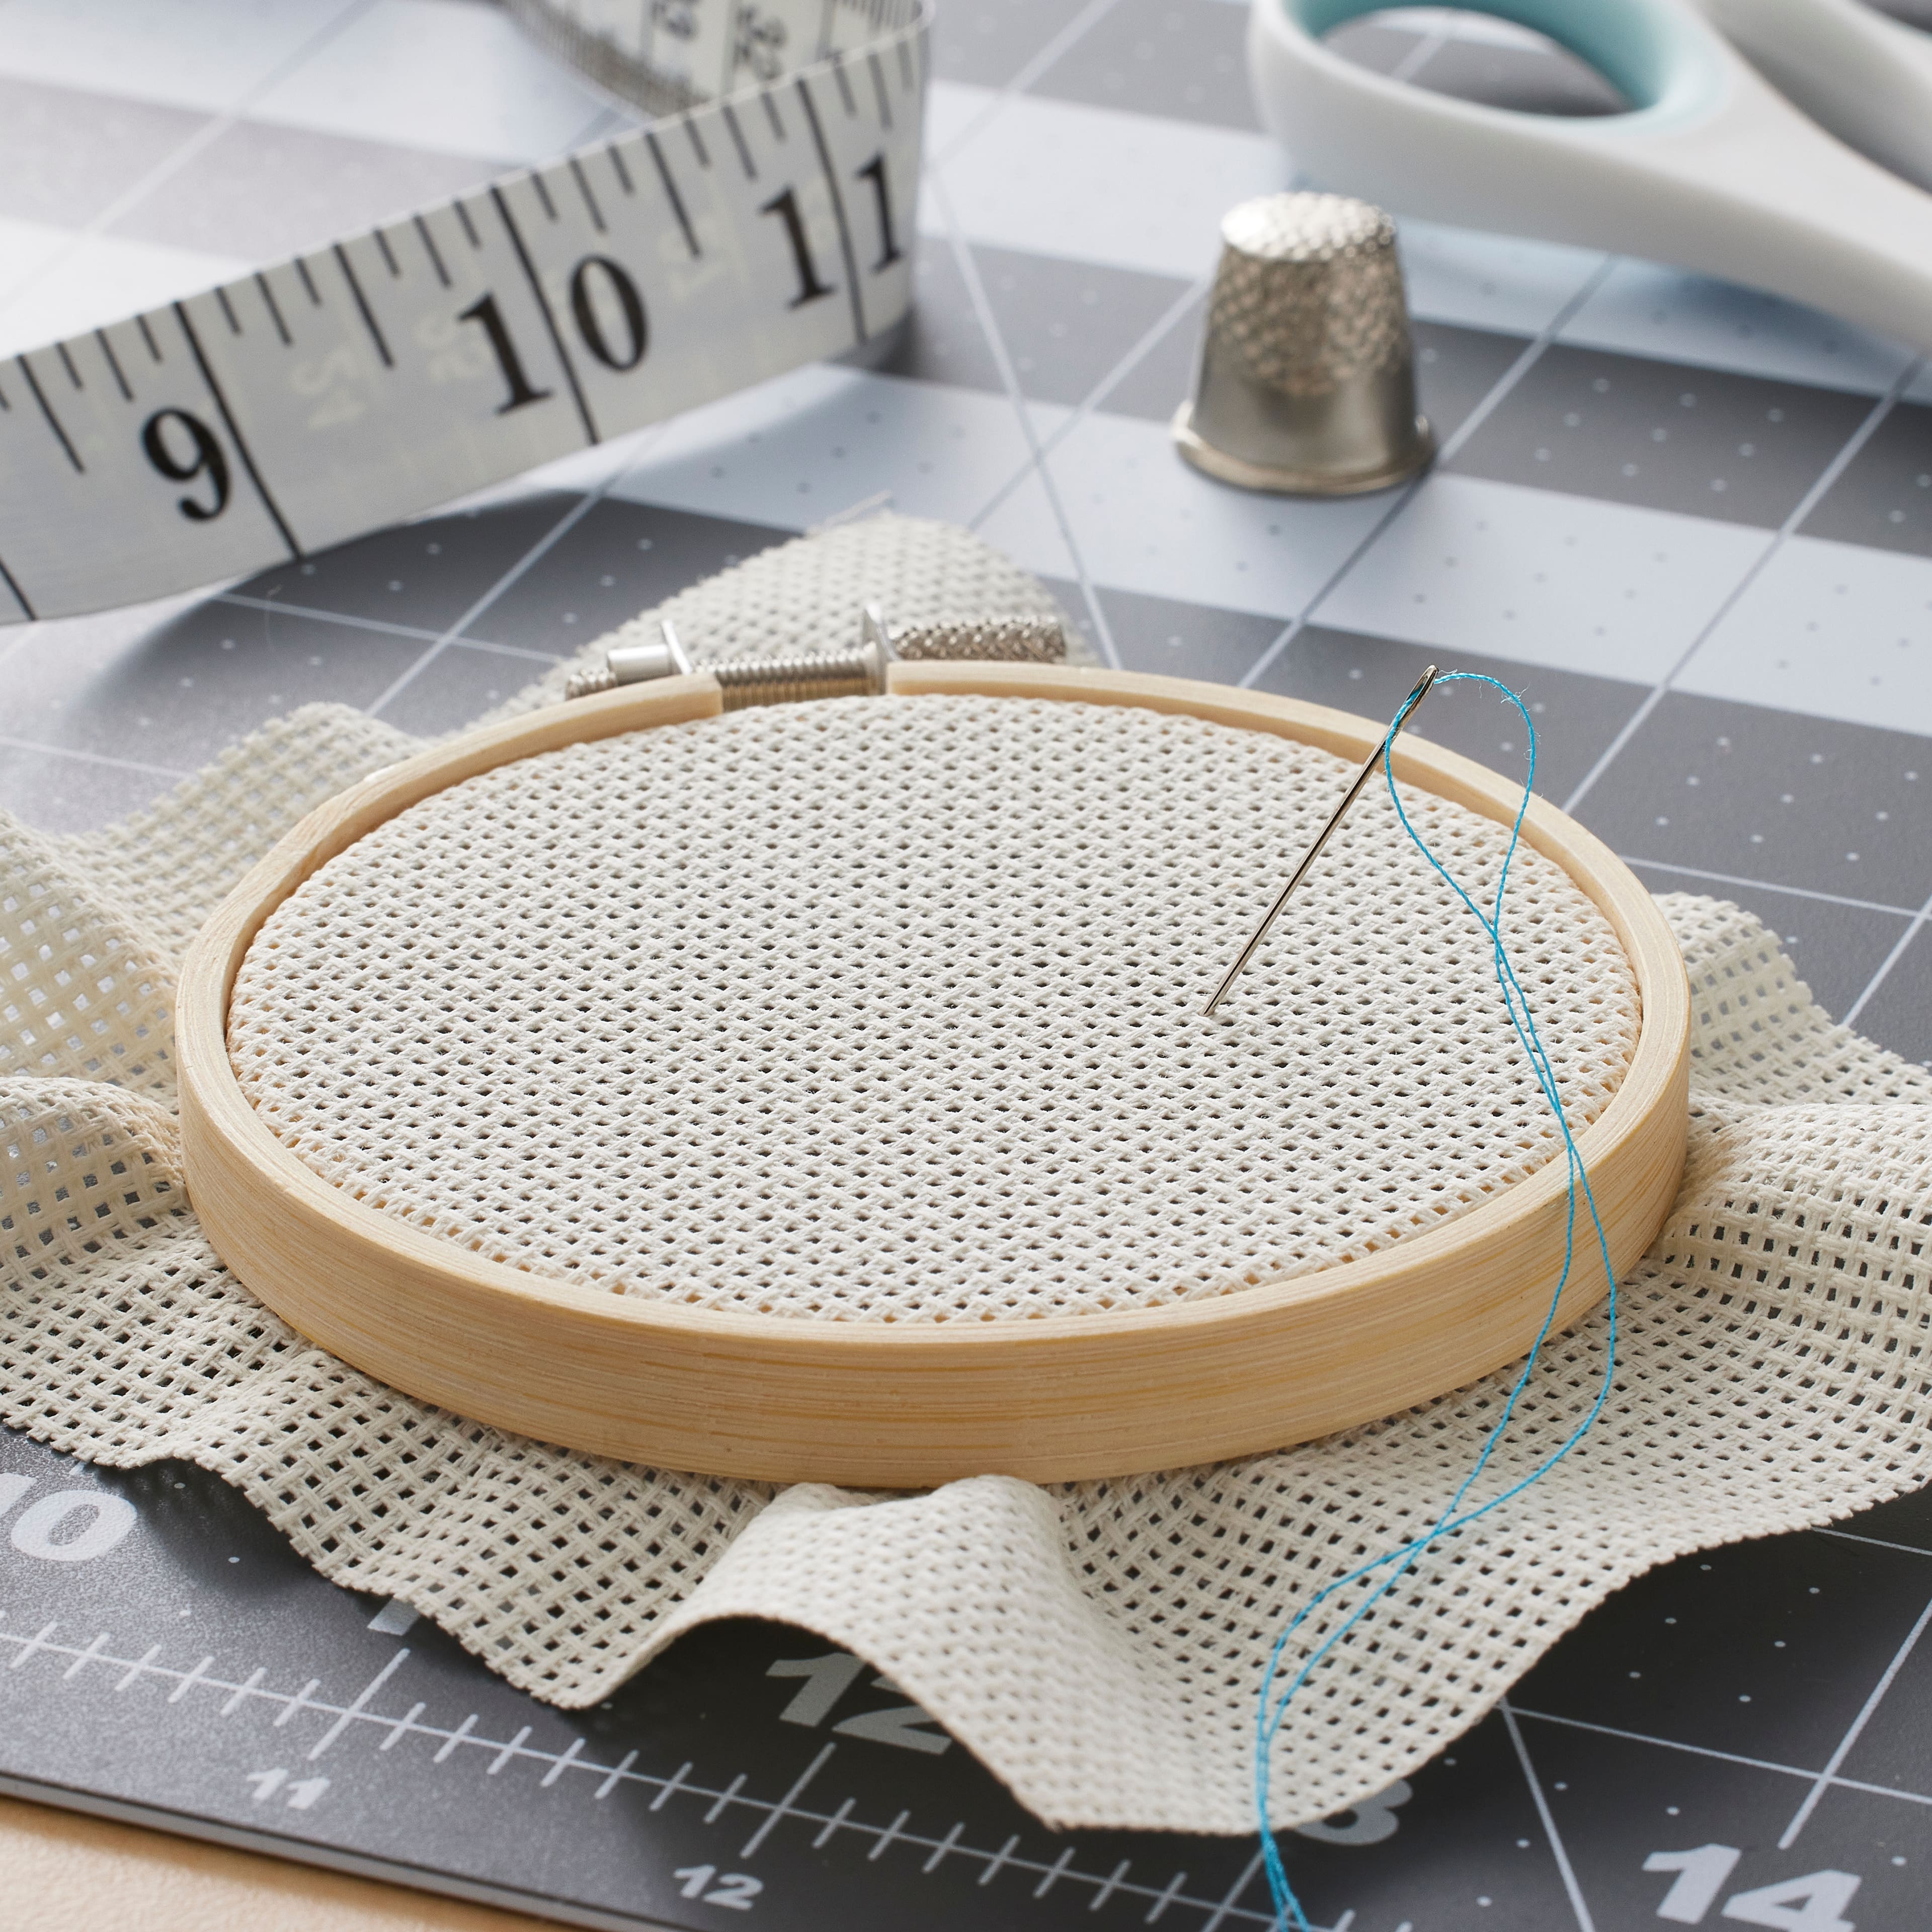 Mini Embroidery Hoop. Small Bamboo Hoop. 4 10cm Round Embroidery